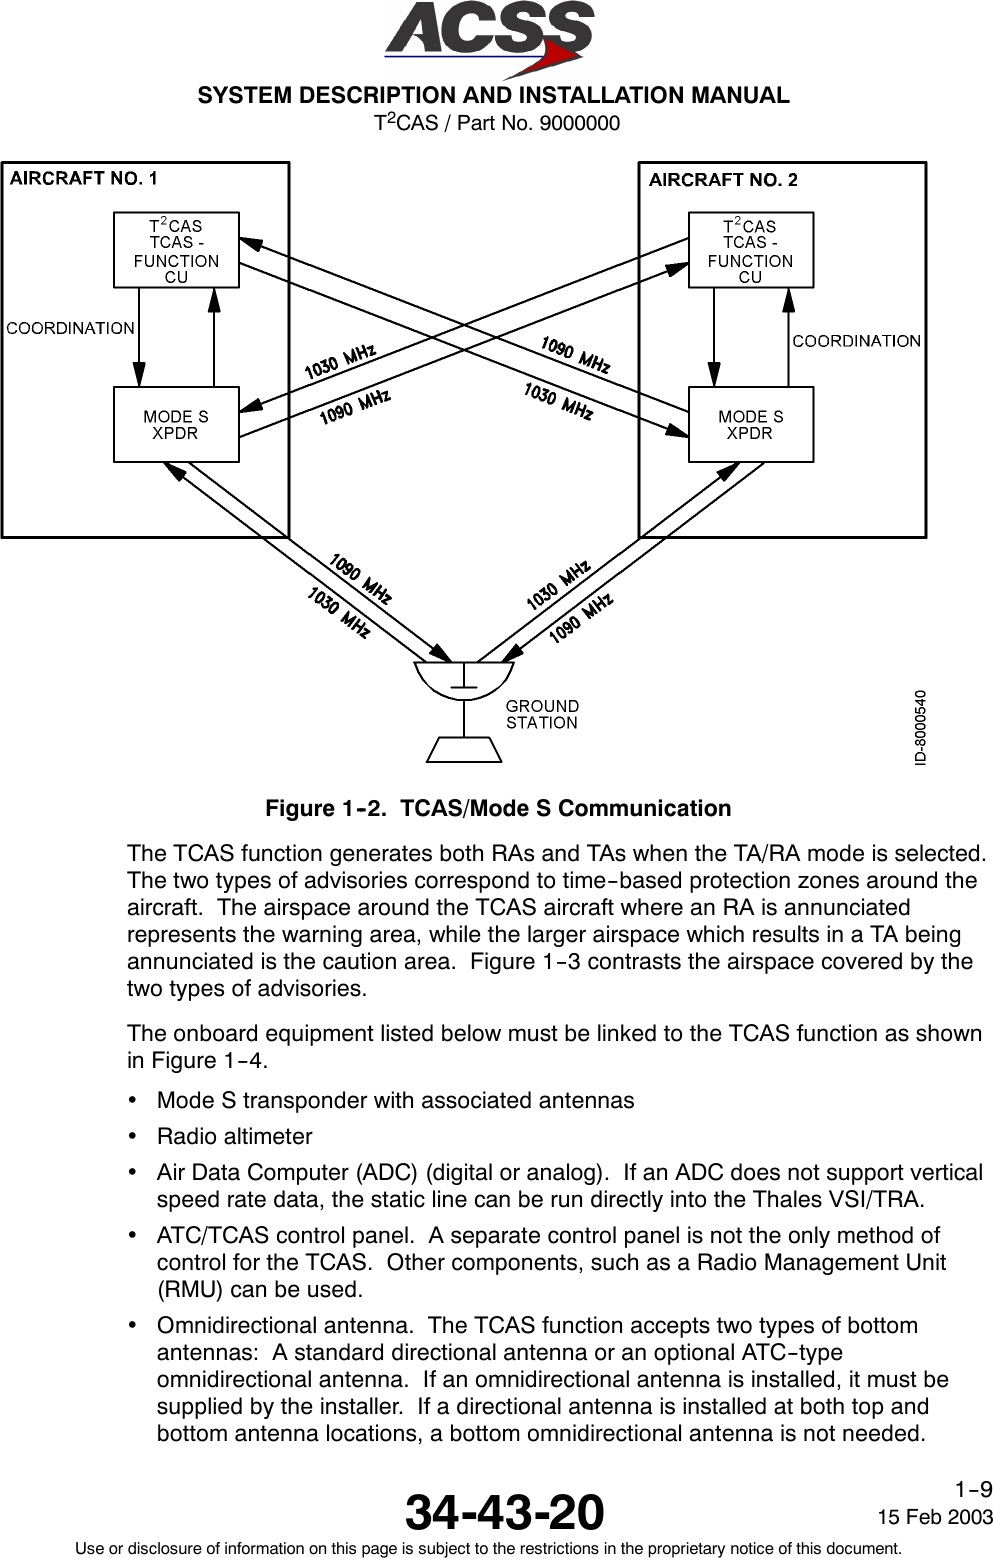 T2CAS / Part No. 9000000SYSTEM DESCRIPTION AND INSTALLATION MANUAL34-43-20 15 Feb 2003Use or disclosure of information on this page is subject to the restrictions in the proprietary notice of this document.1--9Figure 1--2. TCAS/Mode S CommunicationThe TCAS function generates both RAs and TAs when the TA/RA mode is selected.The two types of advisories correspond to time--based protection zones around theaircraft. The airspace around the TCAS aircraft where an RA is annunciatedrepresents the warning area, while the larger airspace which results in a TA beingannunciated is the caution area. Figure 1--3 contrasts the airspace covered by thetwo types of advisories.The onboard equipment listed below must be linked to the TCAS function as shownin Figure 1--4.•Mode S transponder with associated antennas•Radio altimeter•Air Data Computer (ADC) (digital or analog). If an ADC does not support verticalspeed rate data, the static line can be run directly into the Thales VSI/TRA.•ATC/TCAS control panel. A separate control panel is not the only method ofcontrol for the TCAS. Other components, such as a Radio Management Unit(RMU) can be used.•Omnidirectional antenna. The TCAS function accepts two types of bottomantennas: A standard directional antenna or an optional ATC--typeomnidirectional antenna. If an omnidirectional antenna is installed, it must besupplied by the installer. If a directional antenna is installed at both top andbottom antenna locations, a bottom omnidirectional antenna is not needed.